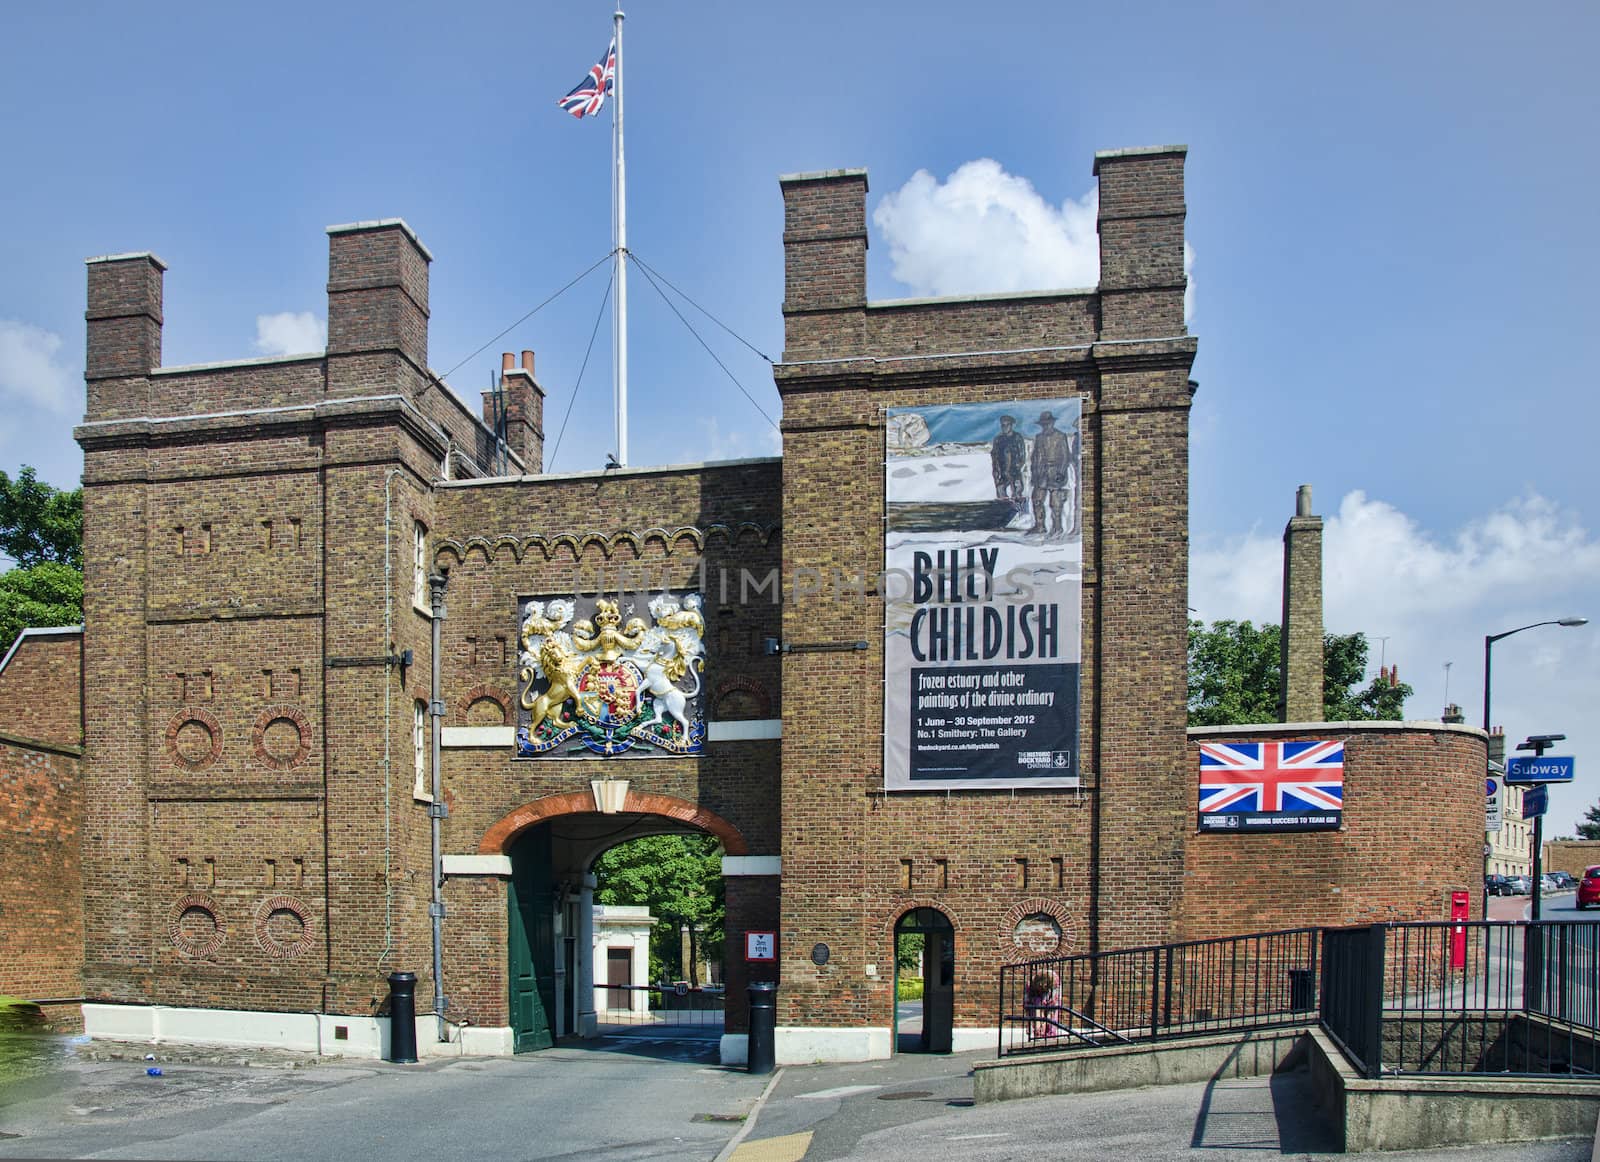 The main gate into Chatham dockyard with flag flying and crest above gate